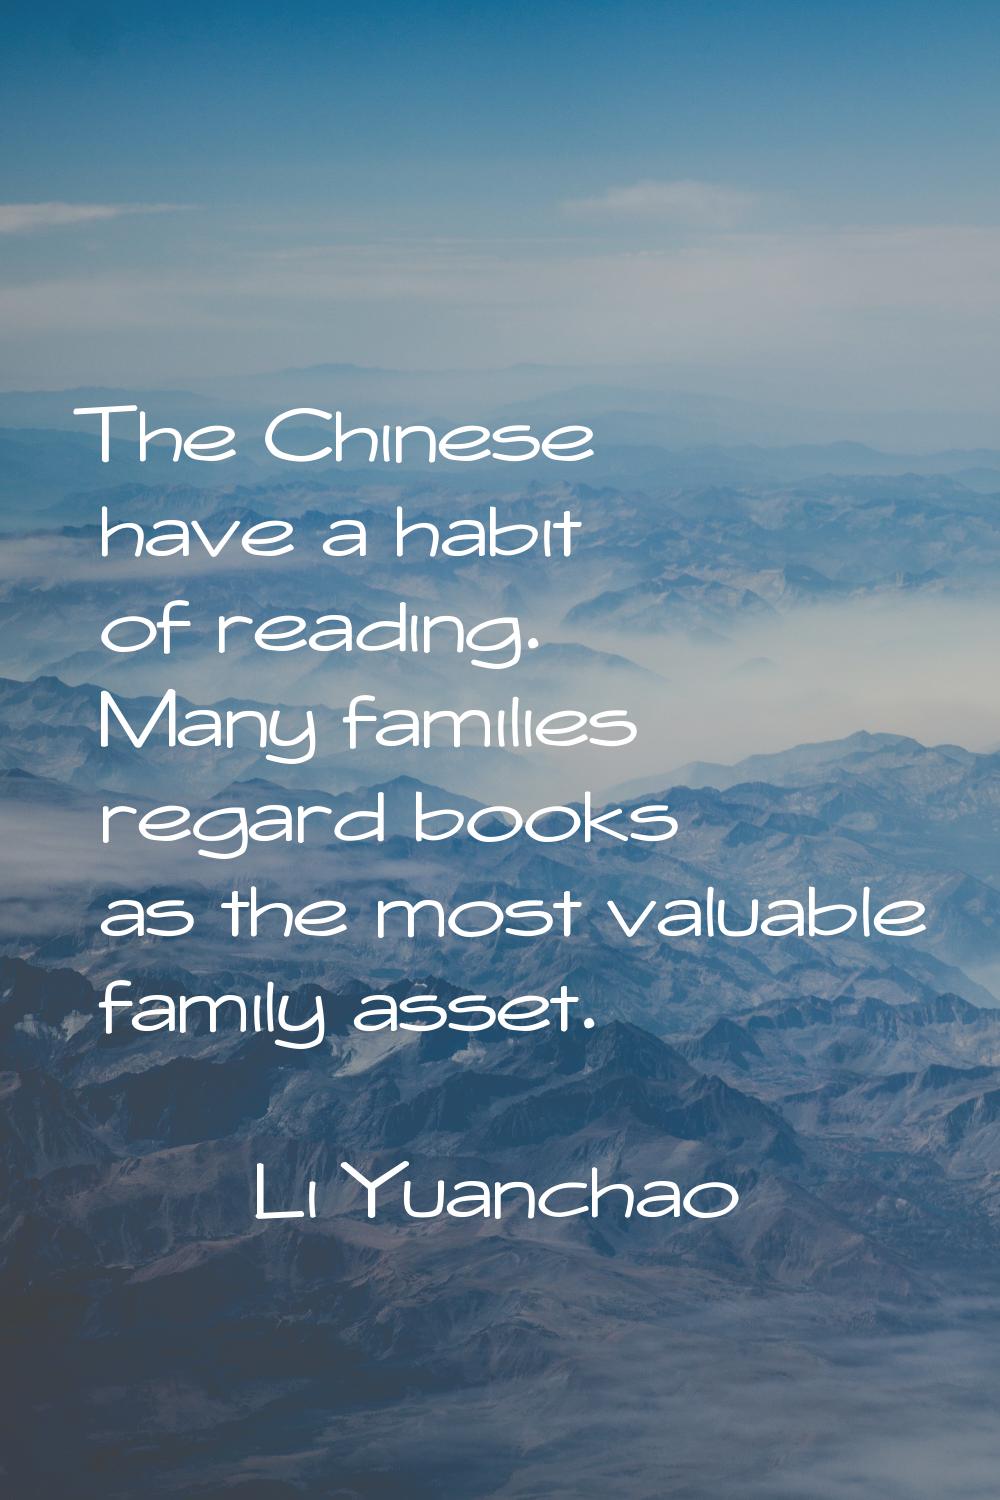 The Chinese have a habit of reading. Many families regard books as the most valuable family asset.